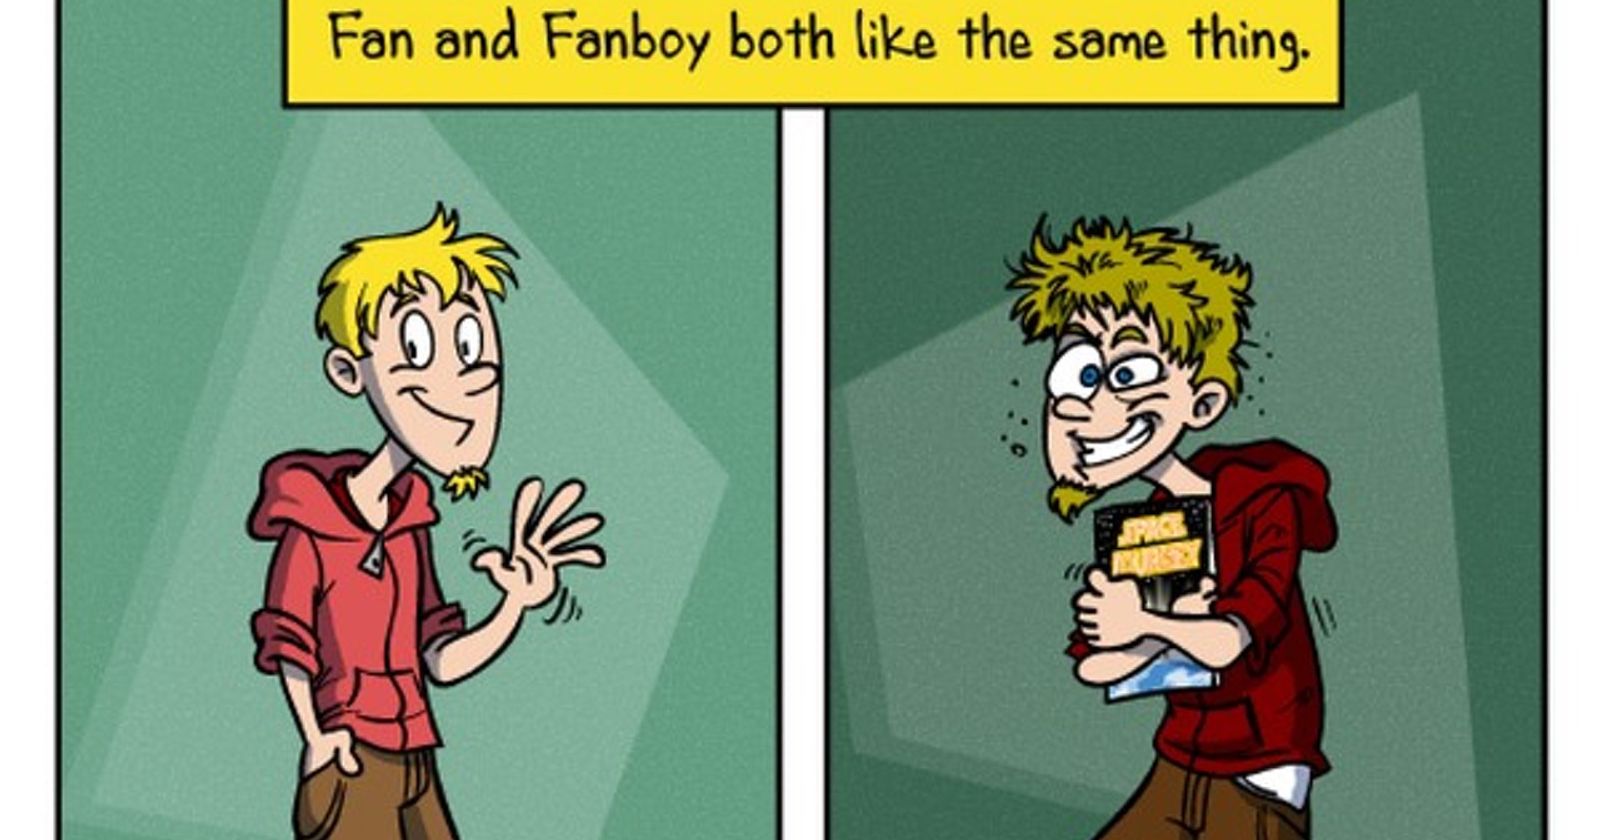 what's the differences between fanboy and fangirl? i know the two terms  are really similar in